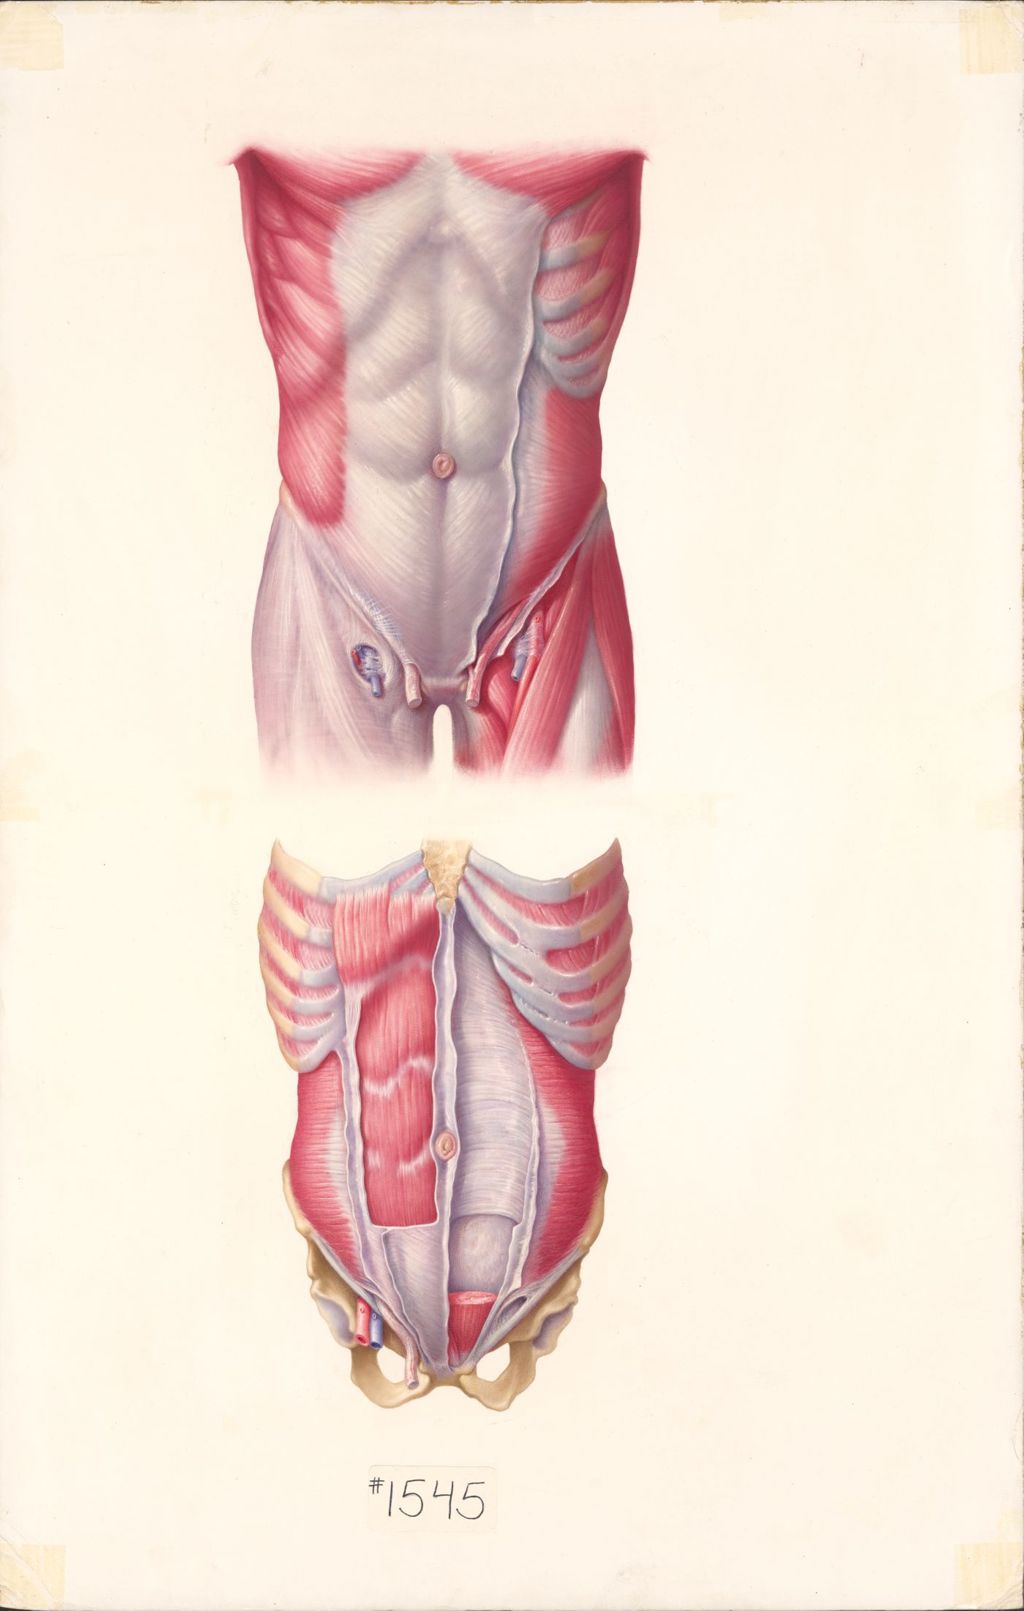 Medical Profiles, The Anatomical Disposition of the Peritoneum, Anterior Abdominal Wall, Plate I, The Musculature of Anterior Abdominal Wall